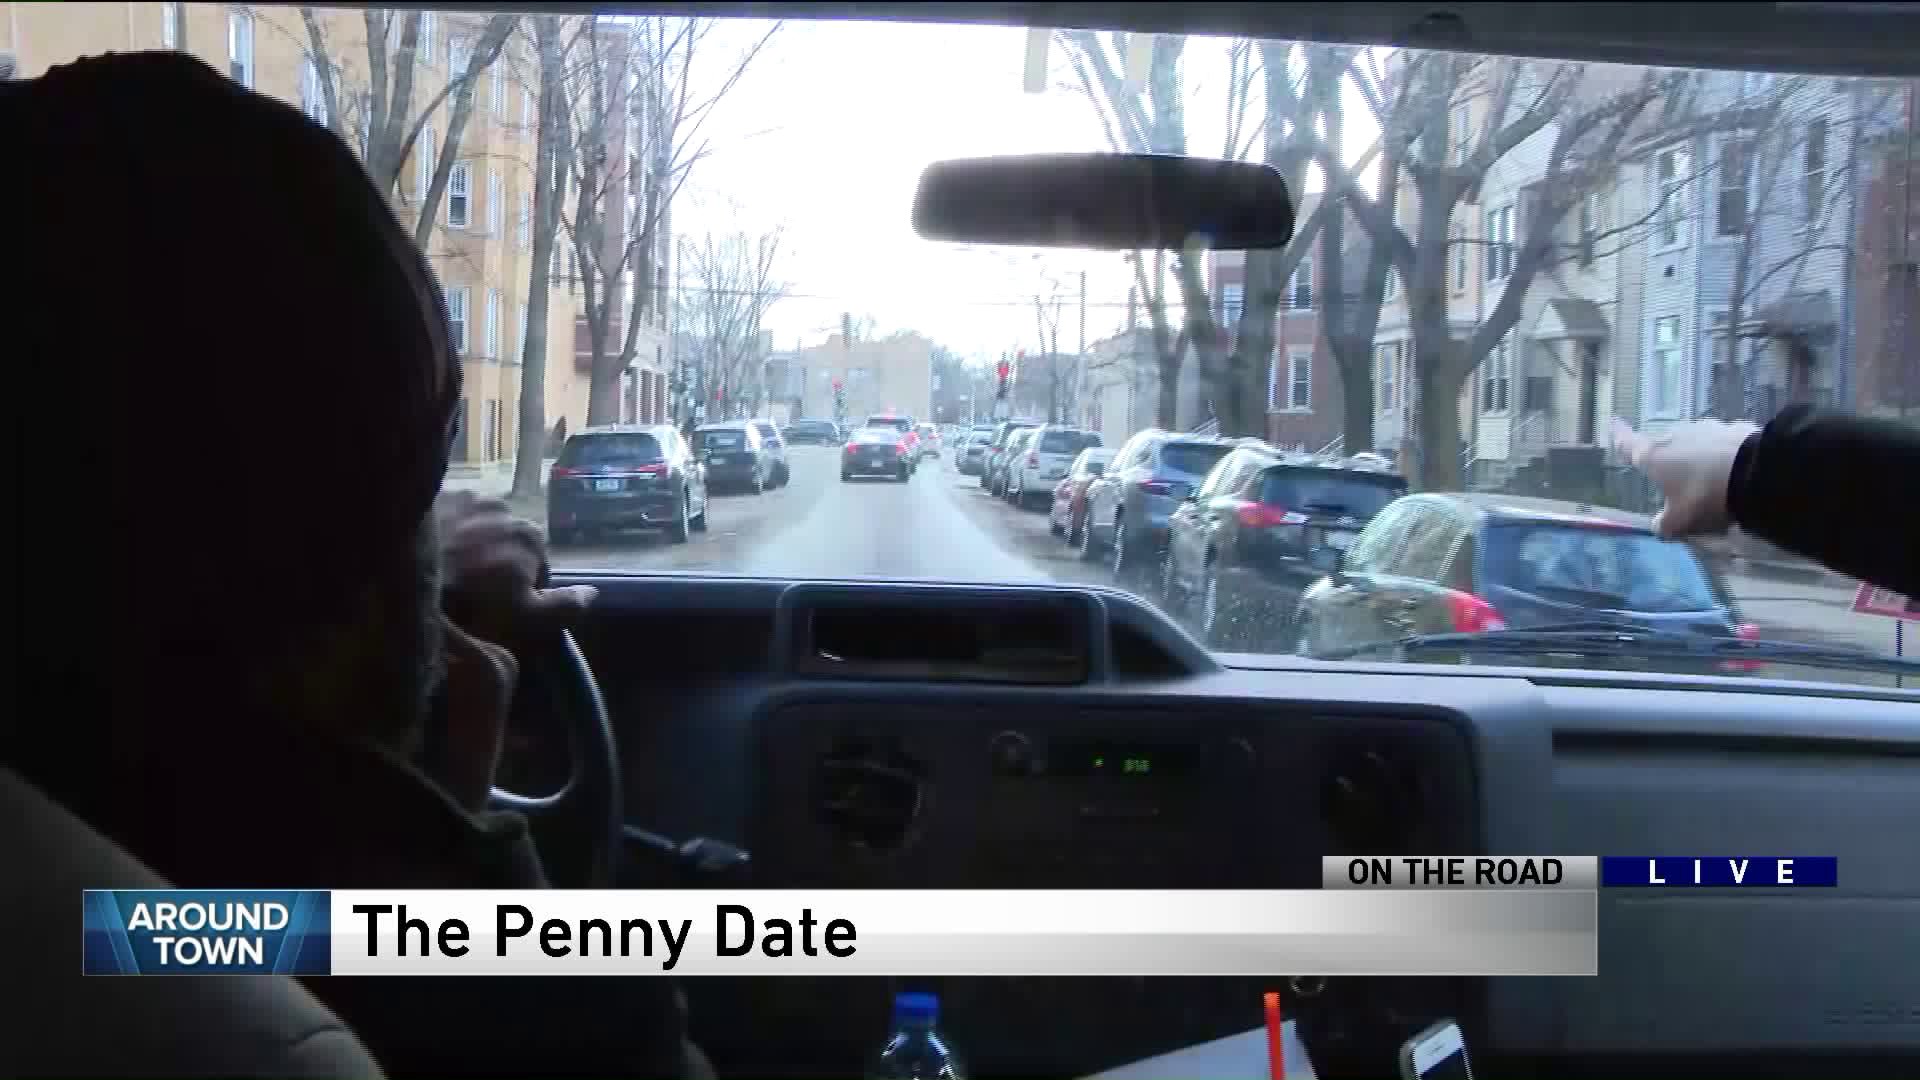 Around Town plays the ‘Penny Date’ game to determine their location